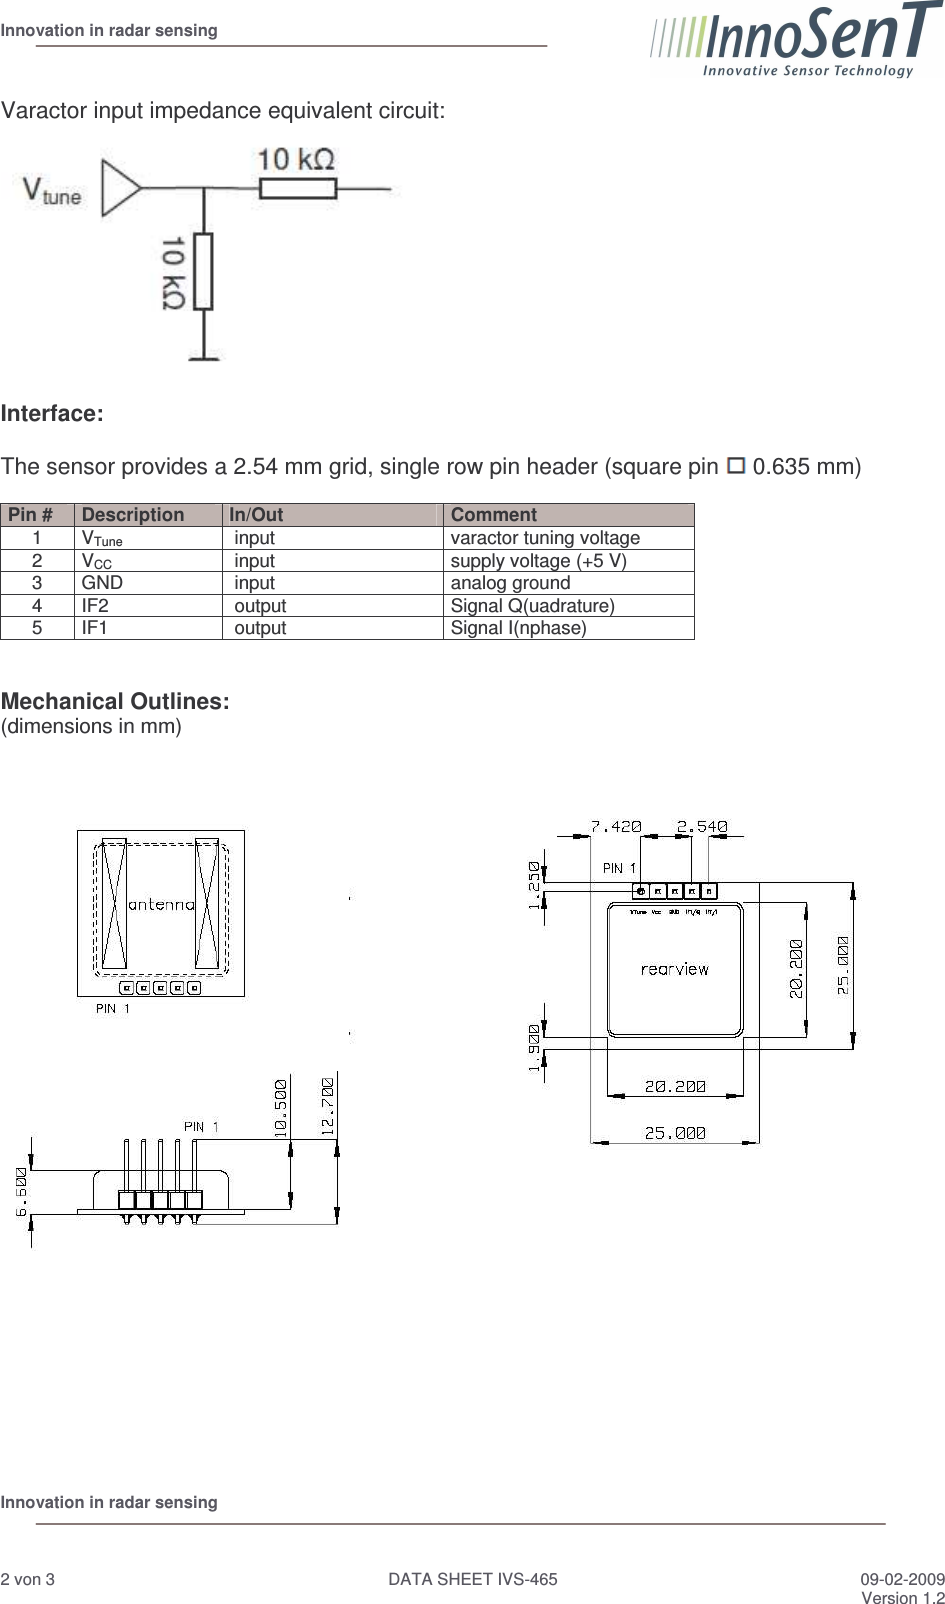  Innovation in radar sensing                                                                Innovation in radar sensing     2 von 3   DATA SHEET IVS-465  09-02-2009    Version 1.2  Varactor input impedance equivalent circuit:  Interface:    The sensor provides a 2.54 mm grid, single row pin header (square pin   0.635 mm)  Pin #  Description  In/Out  Comment 1  VTune    input  varactor tuning voltage 2  VCC   input  supply voltage (+5 V) 3  GND   input  analog ground 4  IF2   output  Signal Q(uadrature) 5  IF1   output  Signal I(nphase)   Mechanical Outlines:   (dimensions in mm)                    